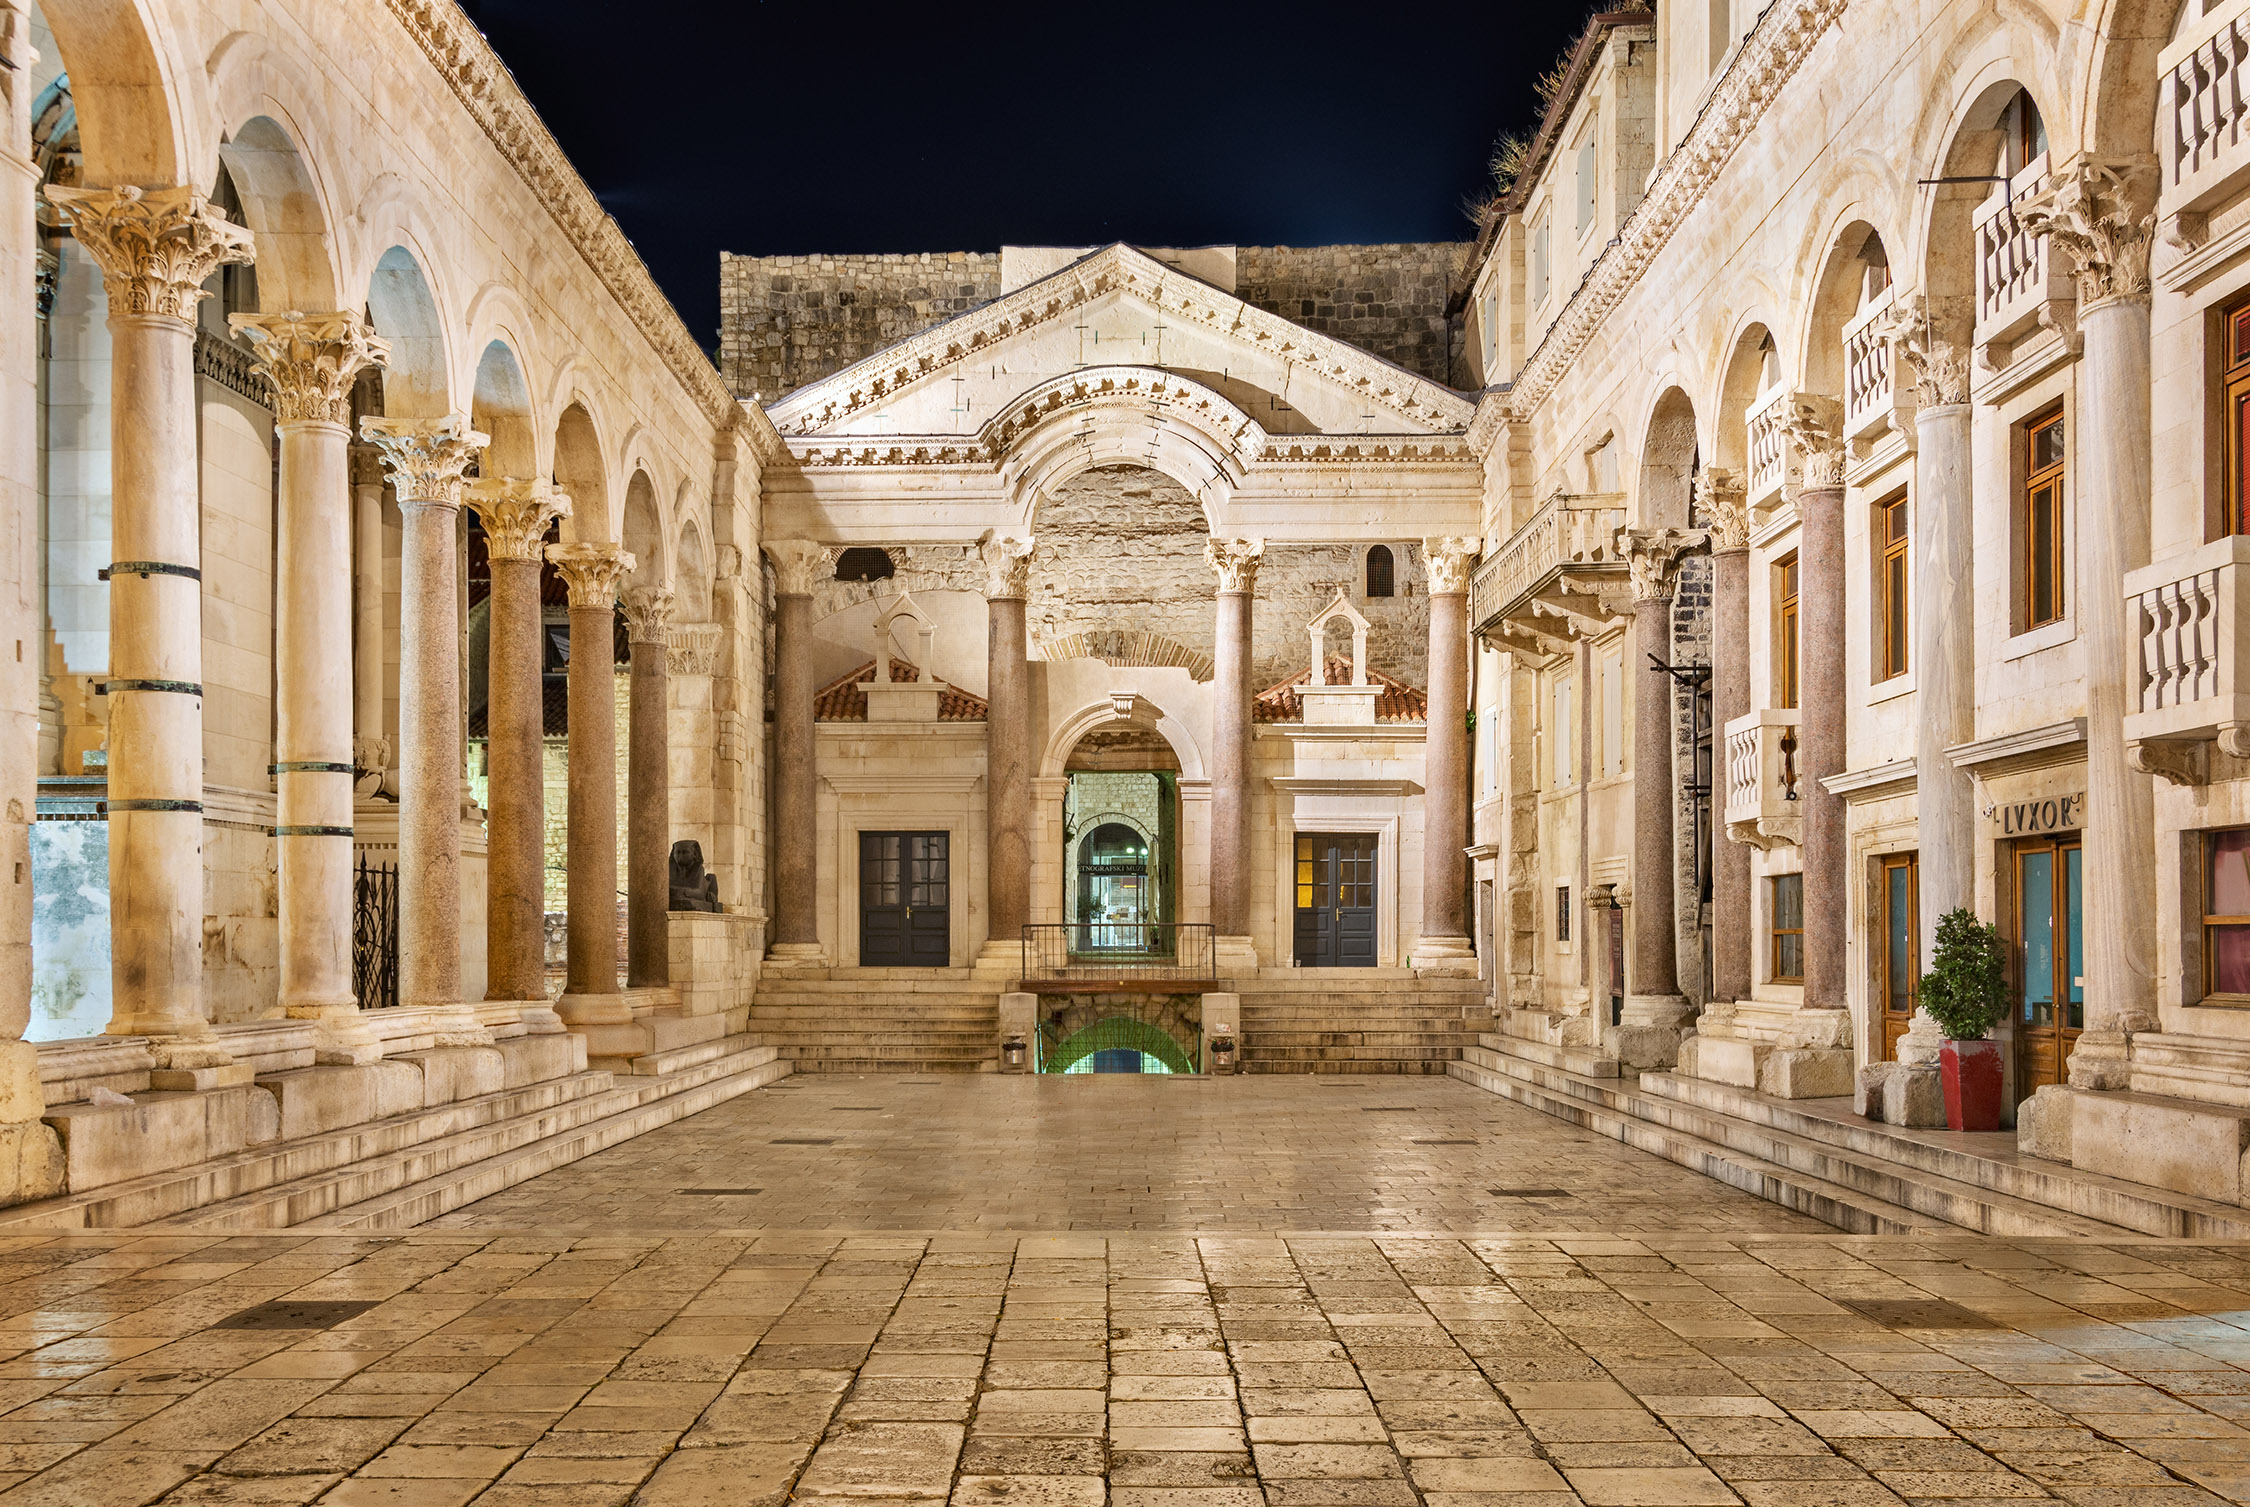 Diocletian’s Palace (Croatia, 1996 Watch): American Express funding allowed for a conservation project at the palace, helping to reinvigorate cultural sites in Croatia after the conflict period.